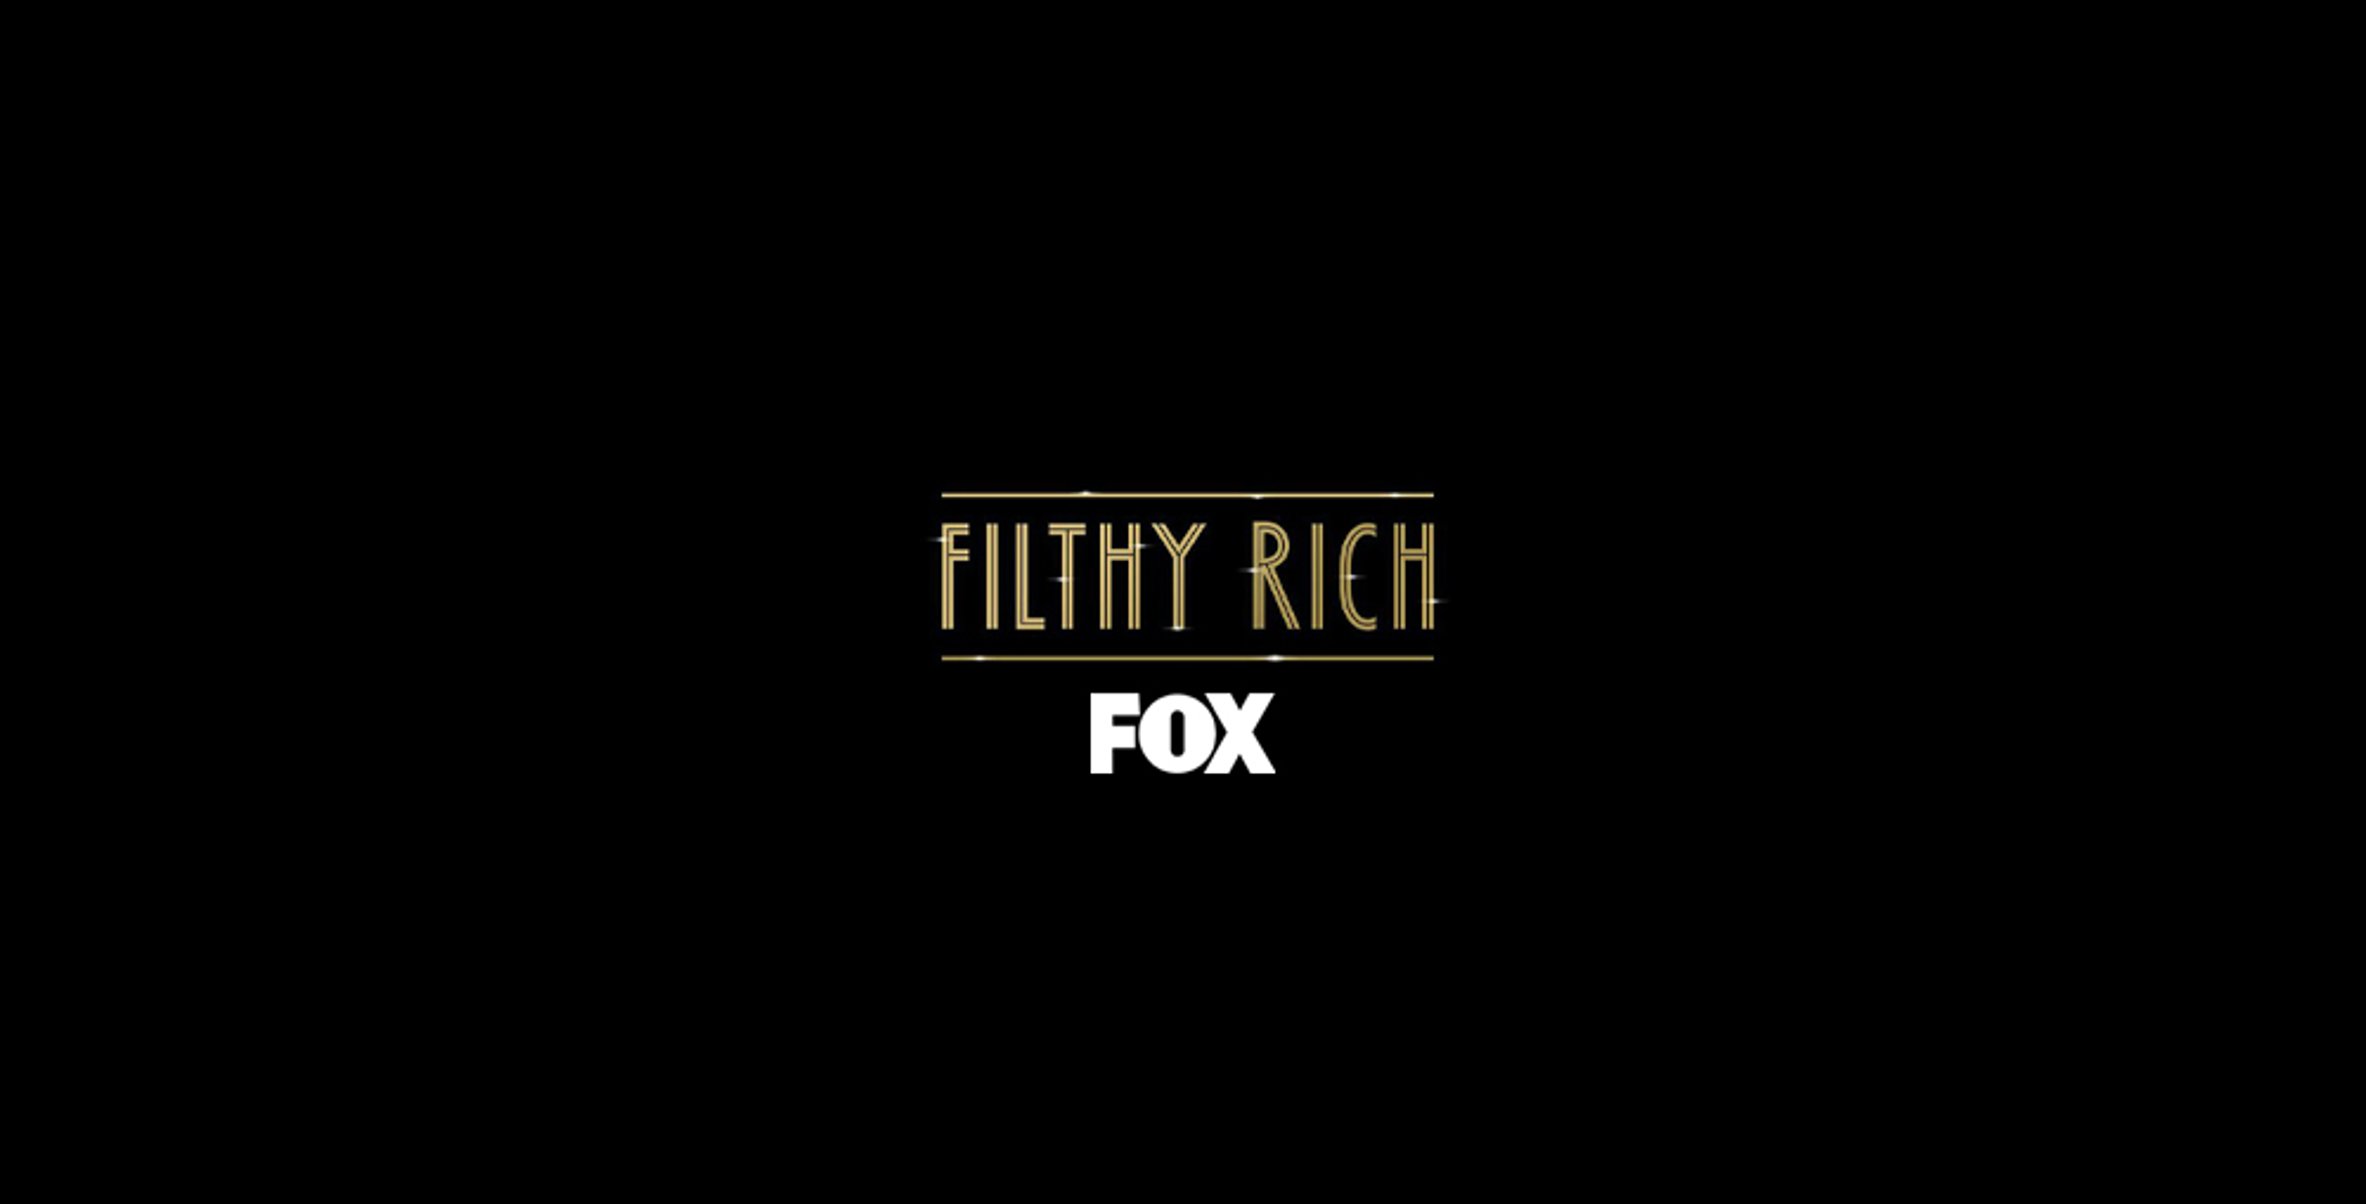 FOX Now casting for TV pilot “Filthy Rich”